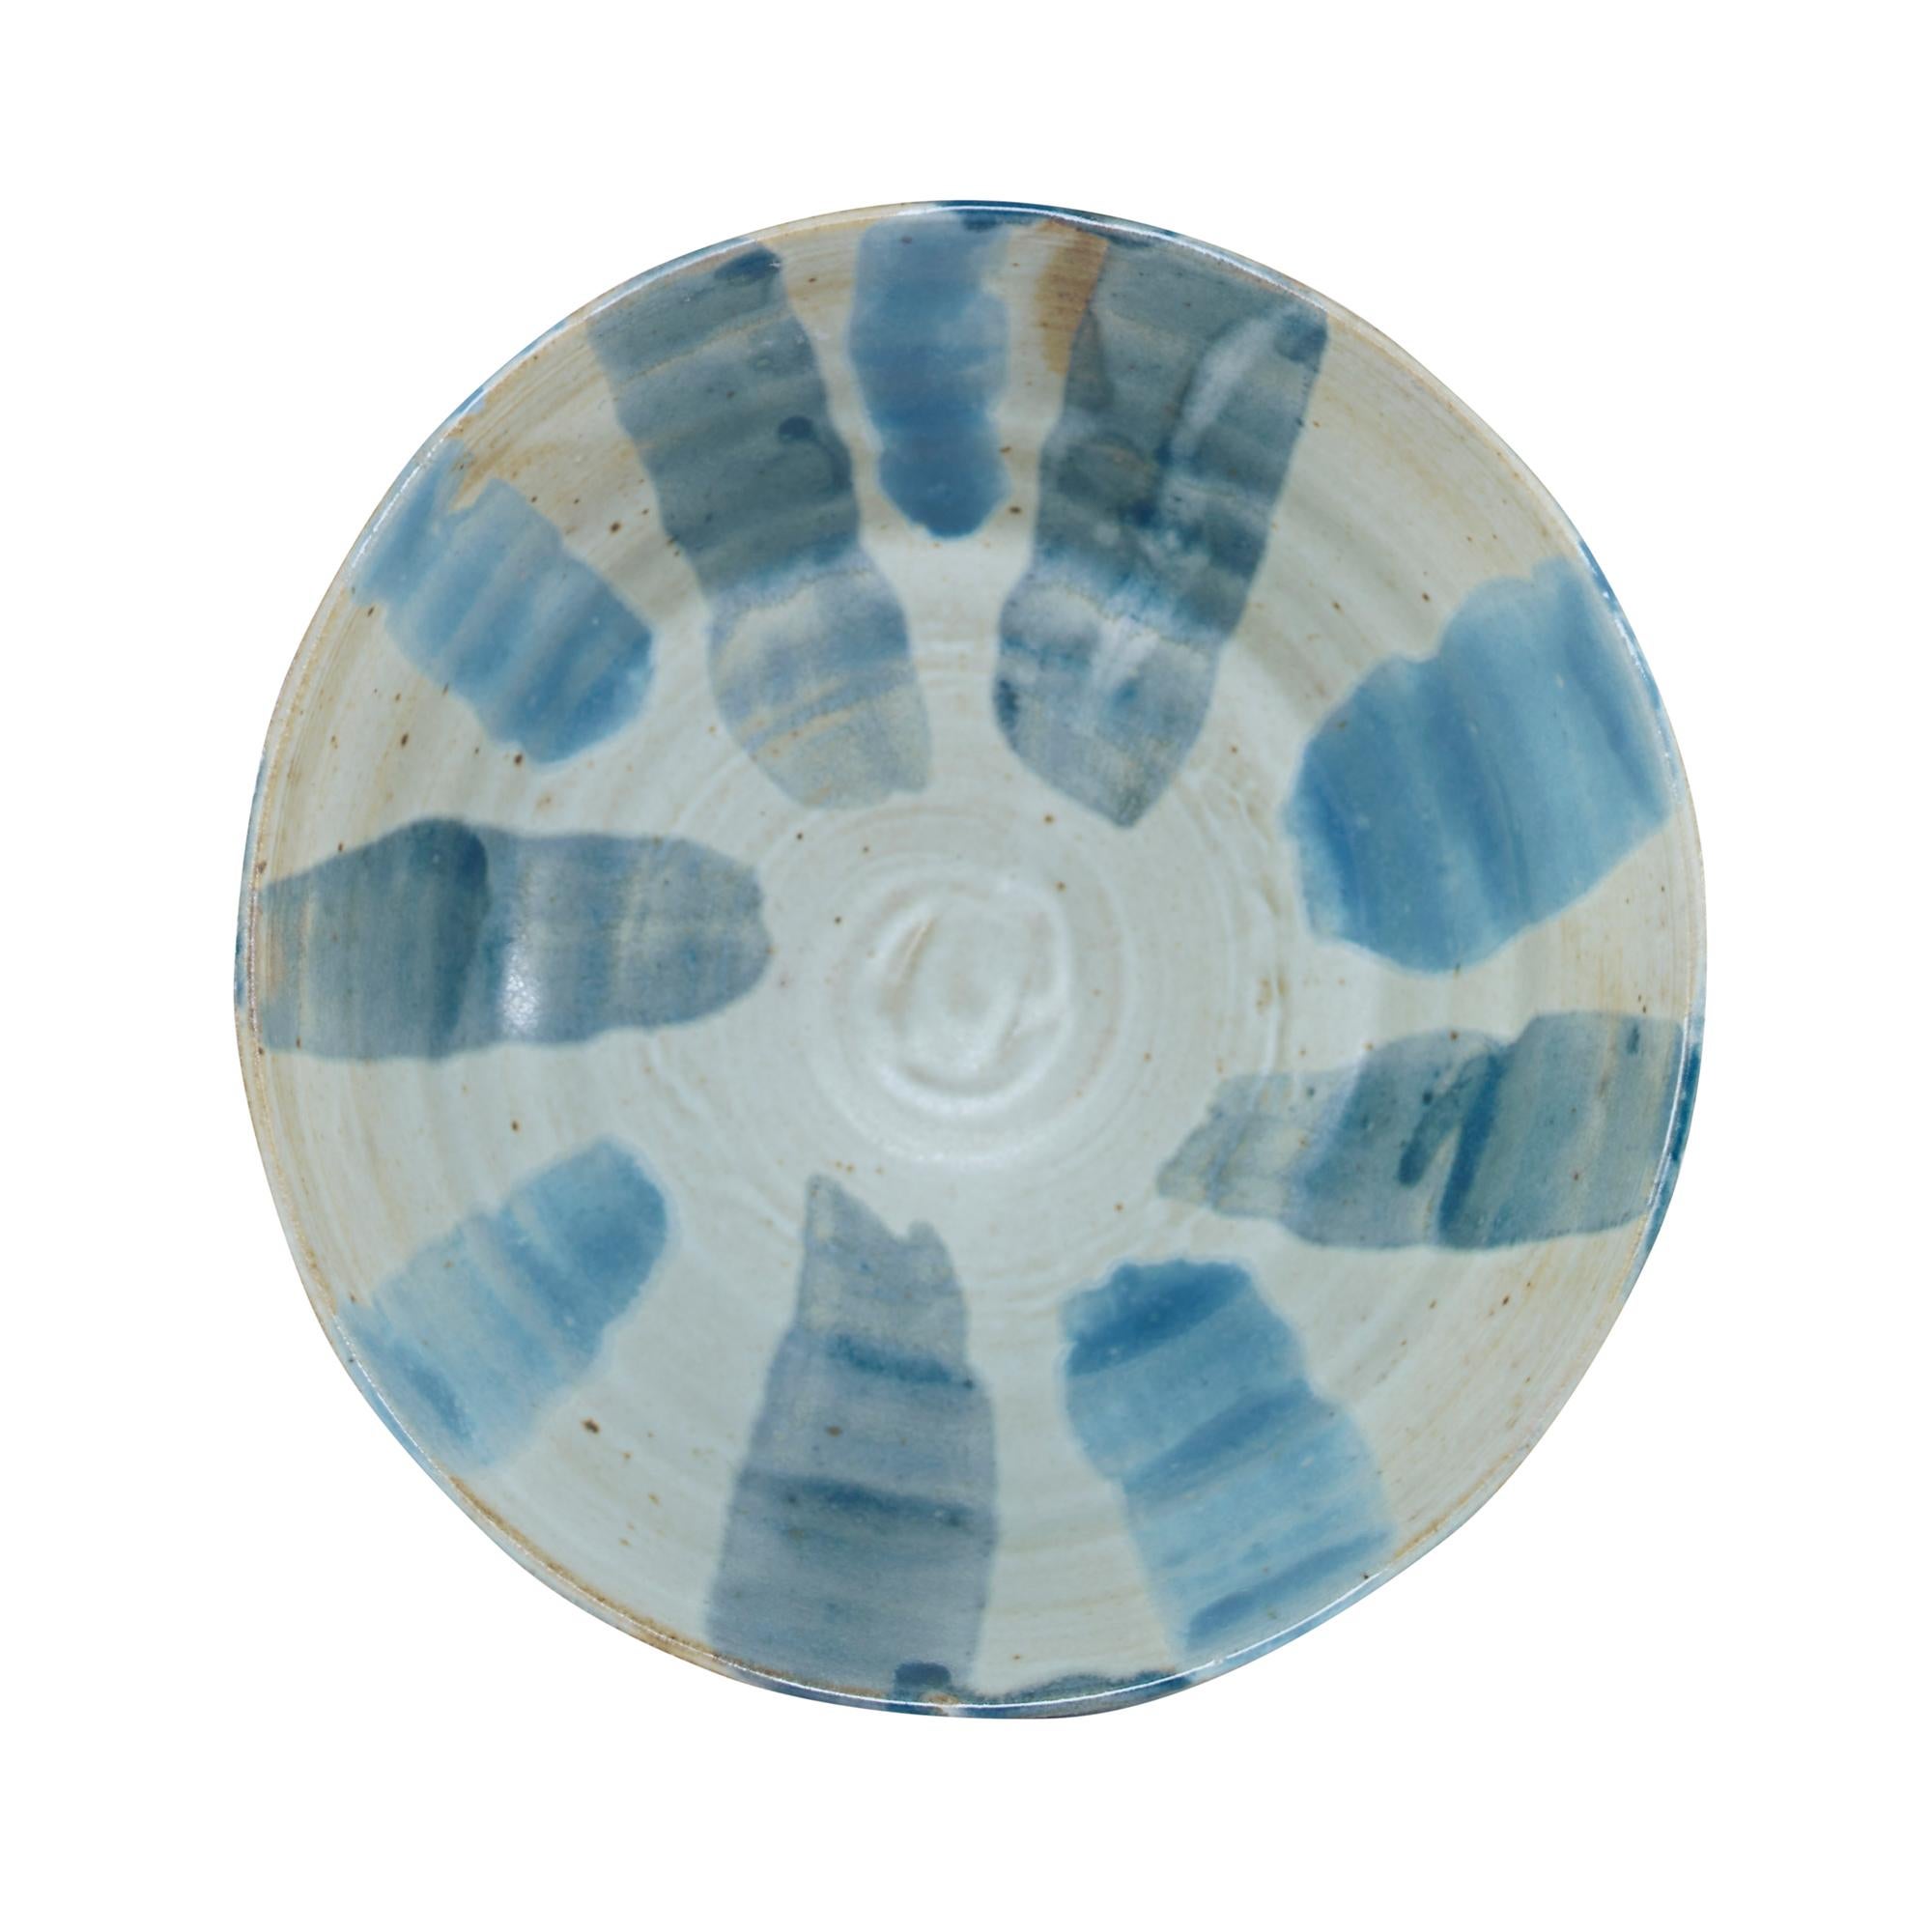 Inspired by Japanese raku, this handmade stoneware bowl features decorative blue stripes painted in contrast to a creamy background. Due to the handmade nature of this product, slight variation in color, pattern, shape and/or size is to be